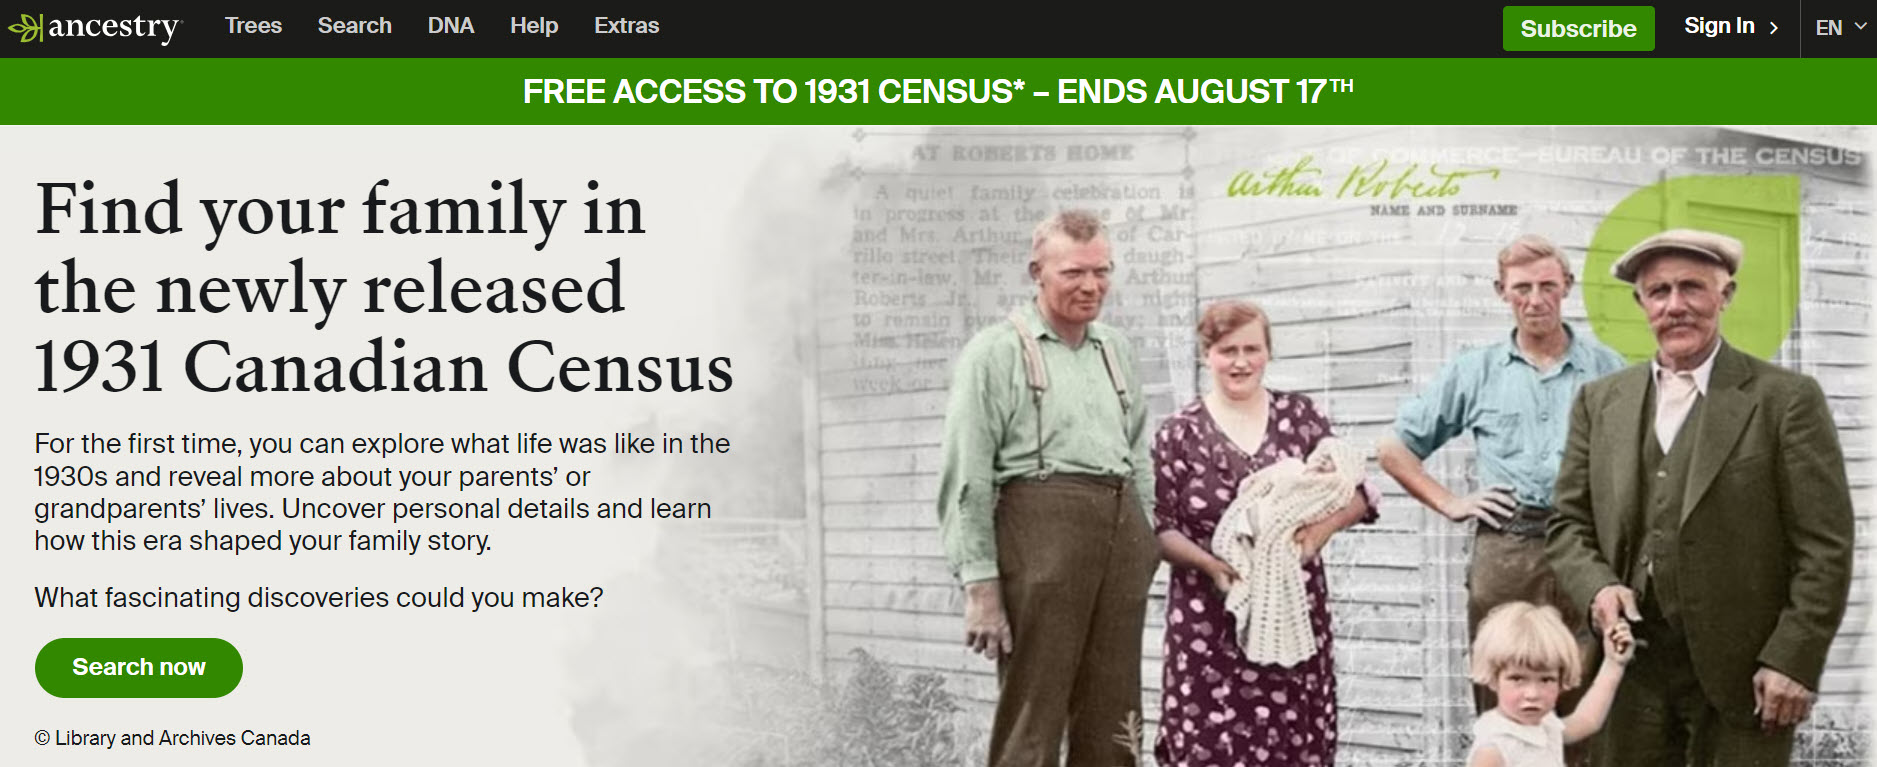 Ancestry Free Access The 1931 Census of Canada